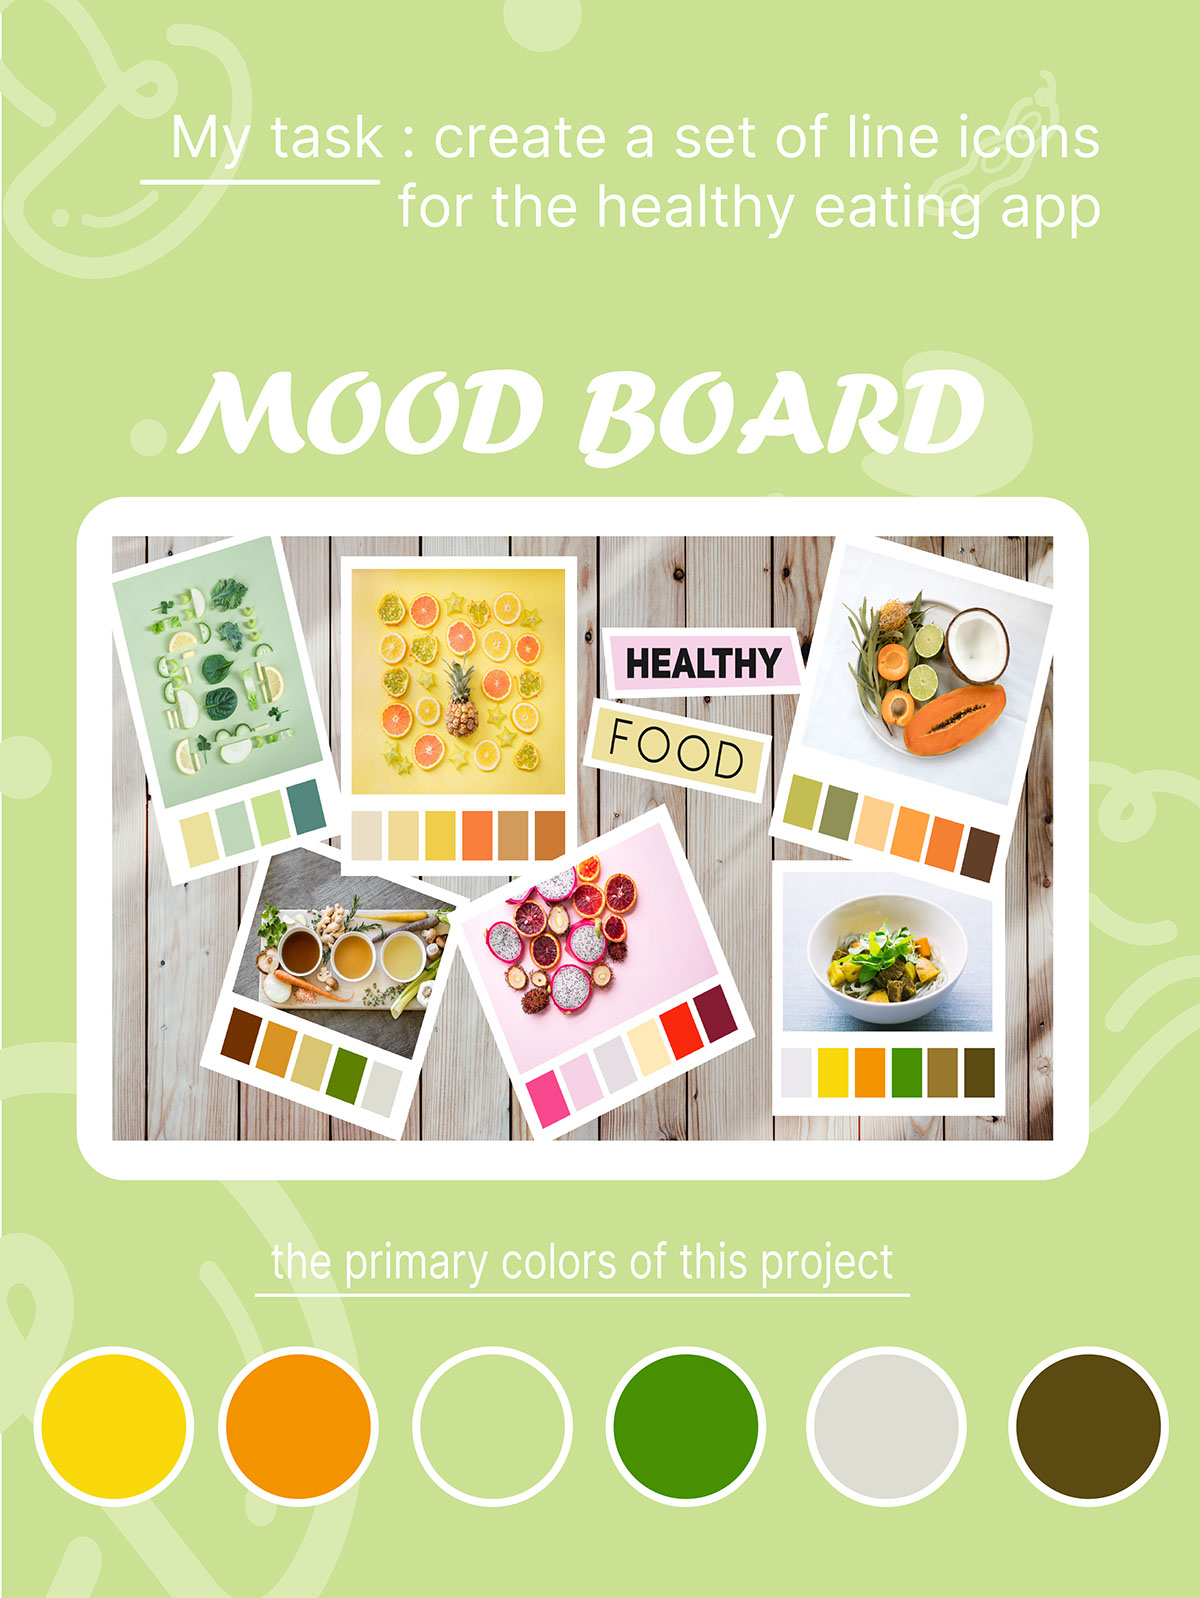 Healthy food icons rendition image